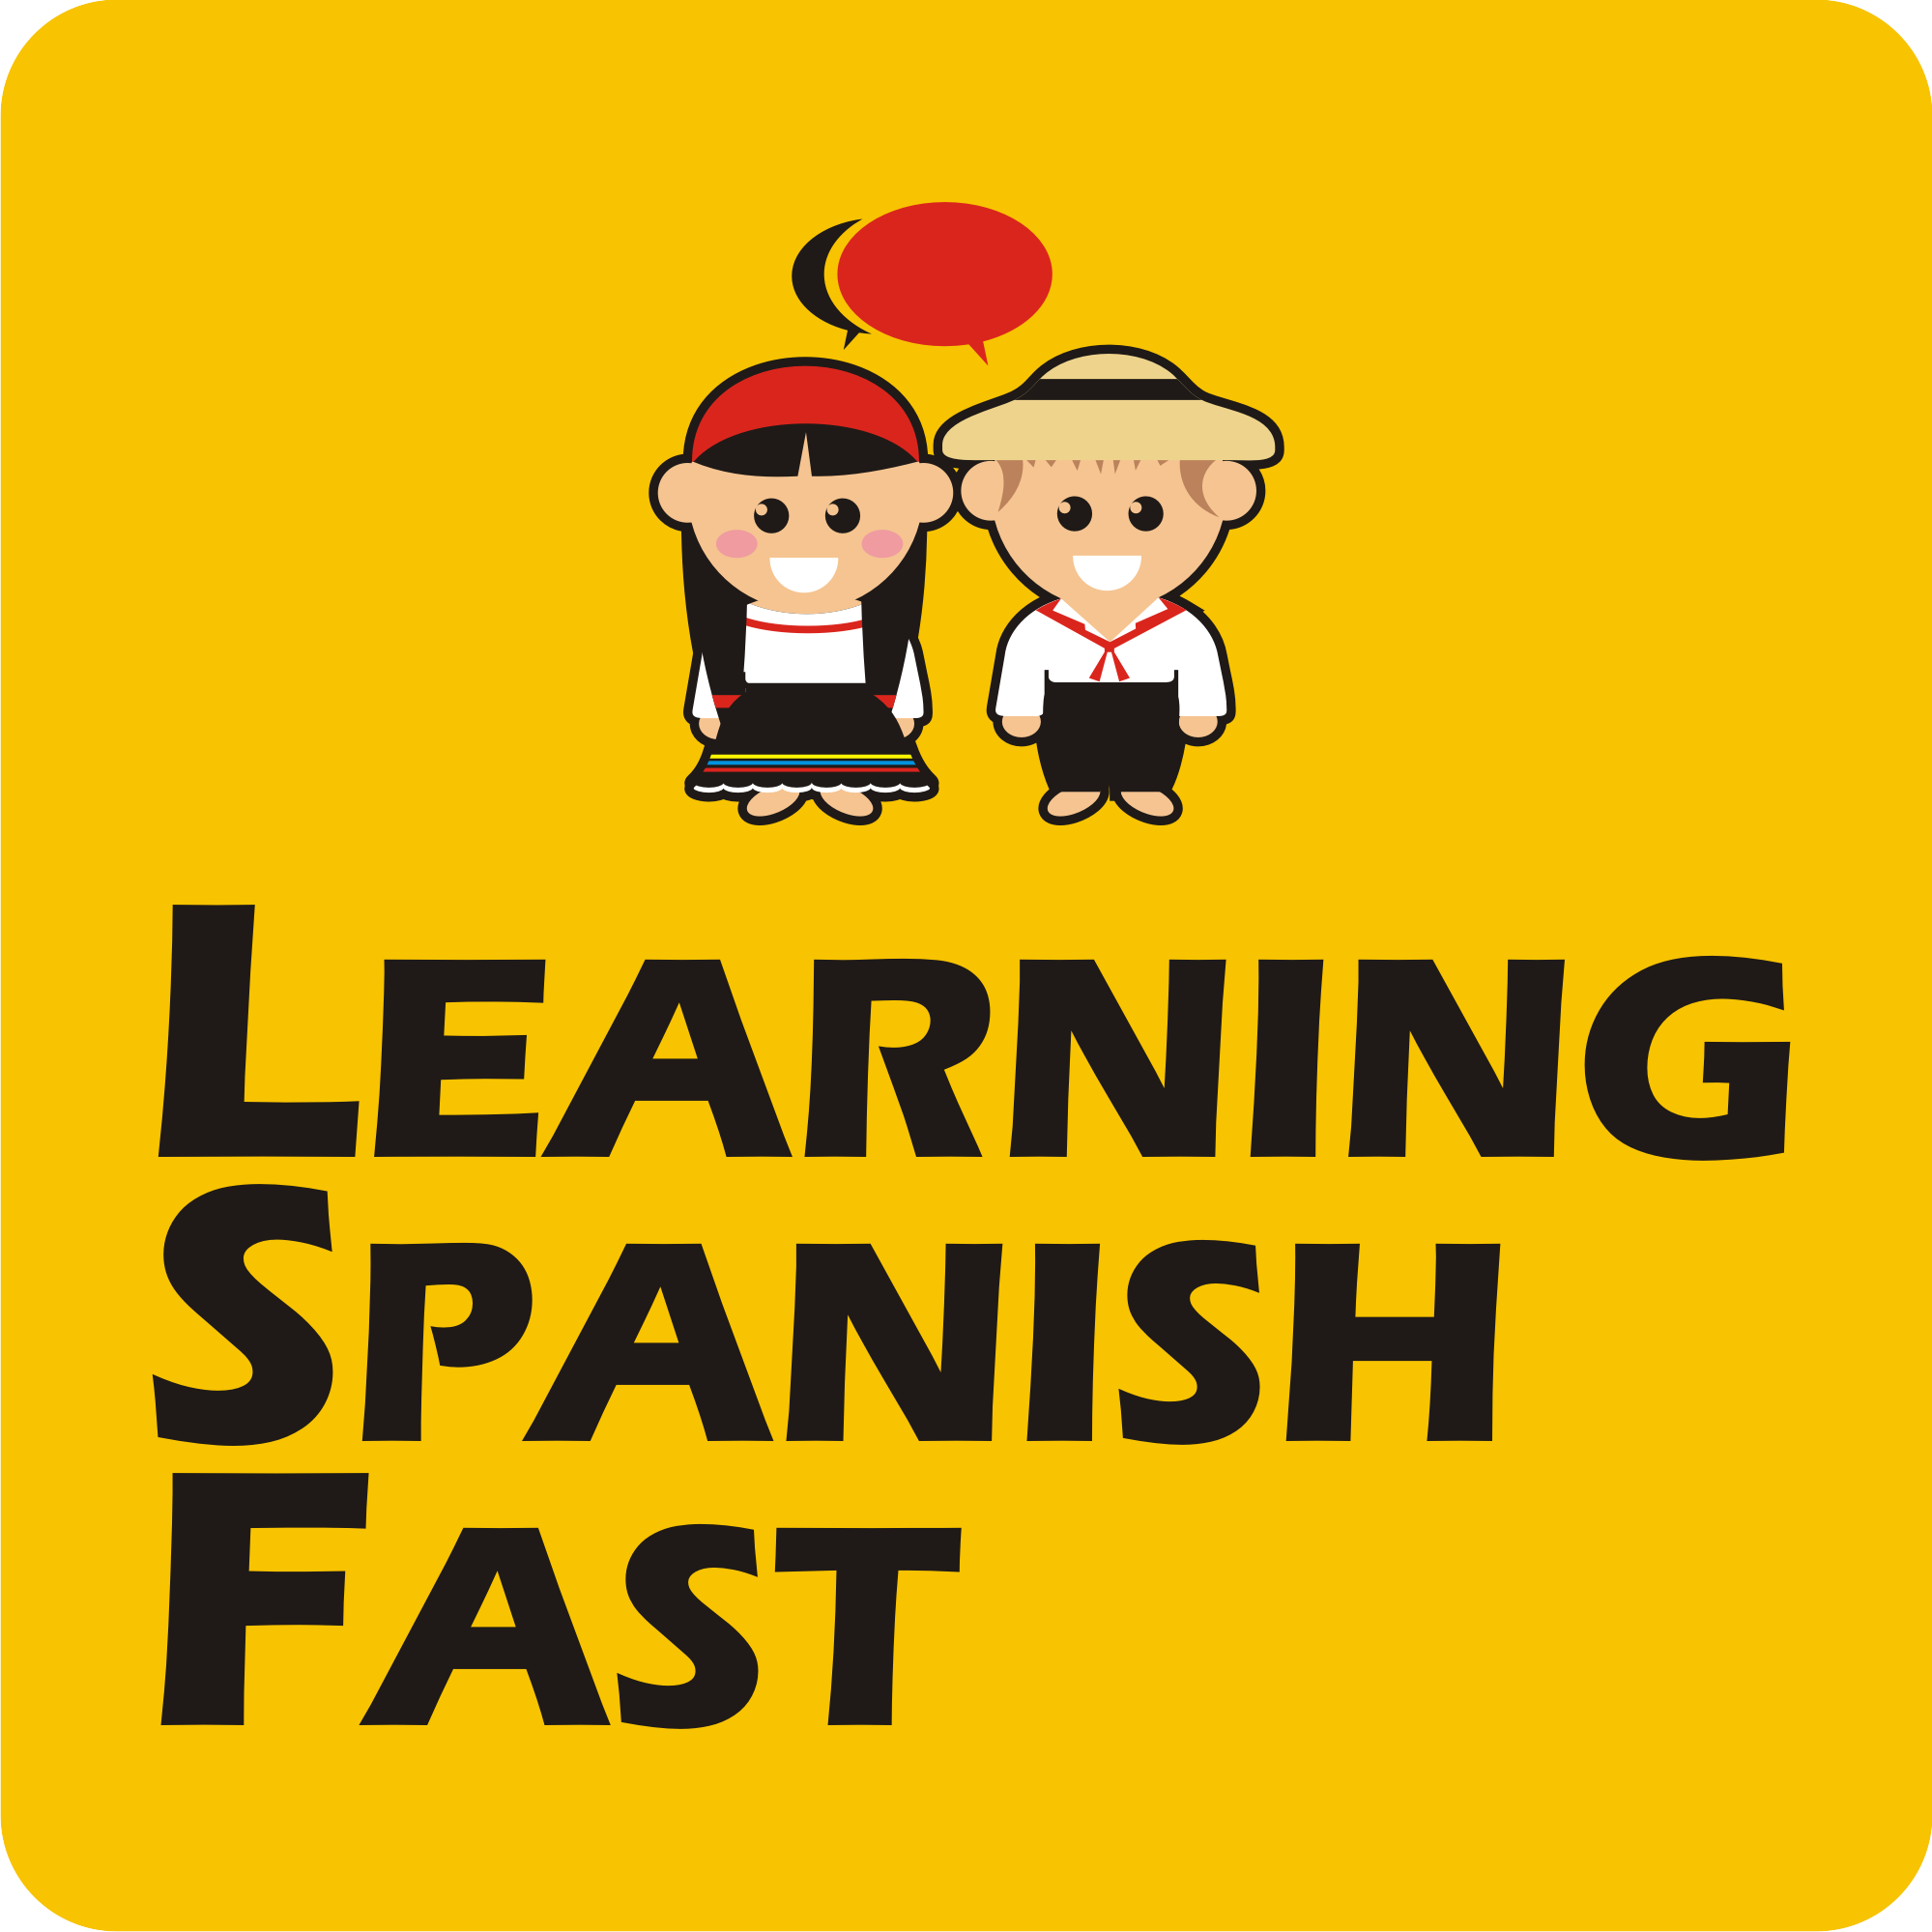 Master Spanish in just 19 minutes a day with our Latin American focused audio podcasts! And free Spanish guides...